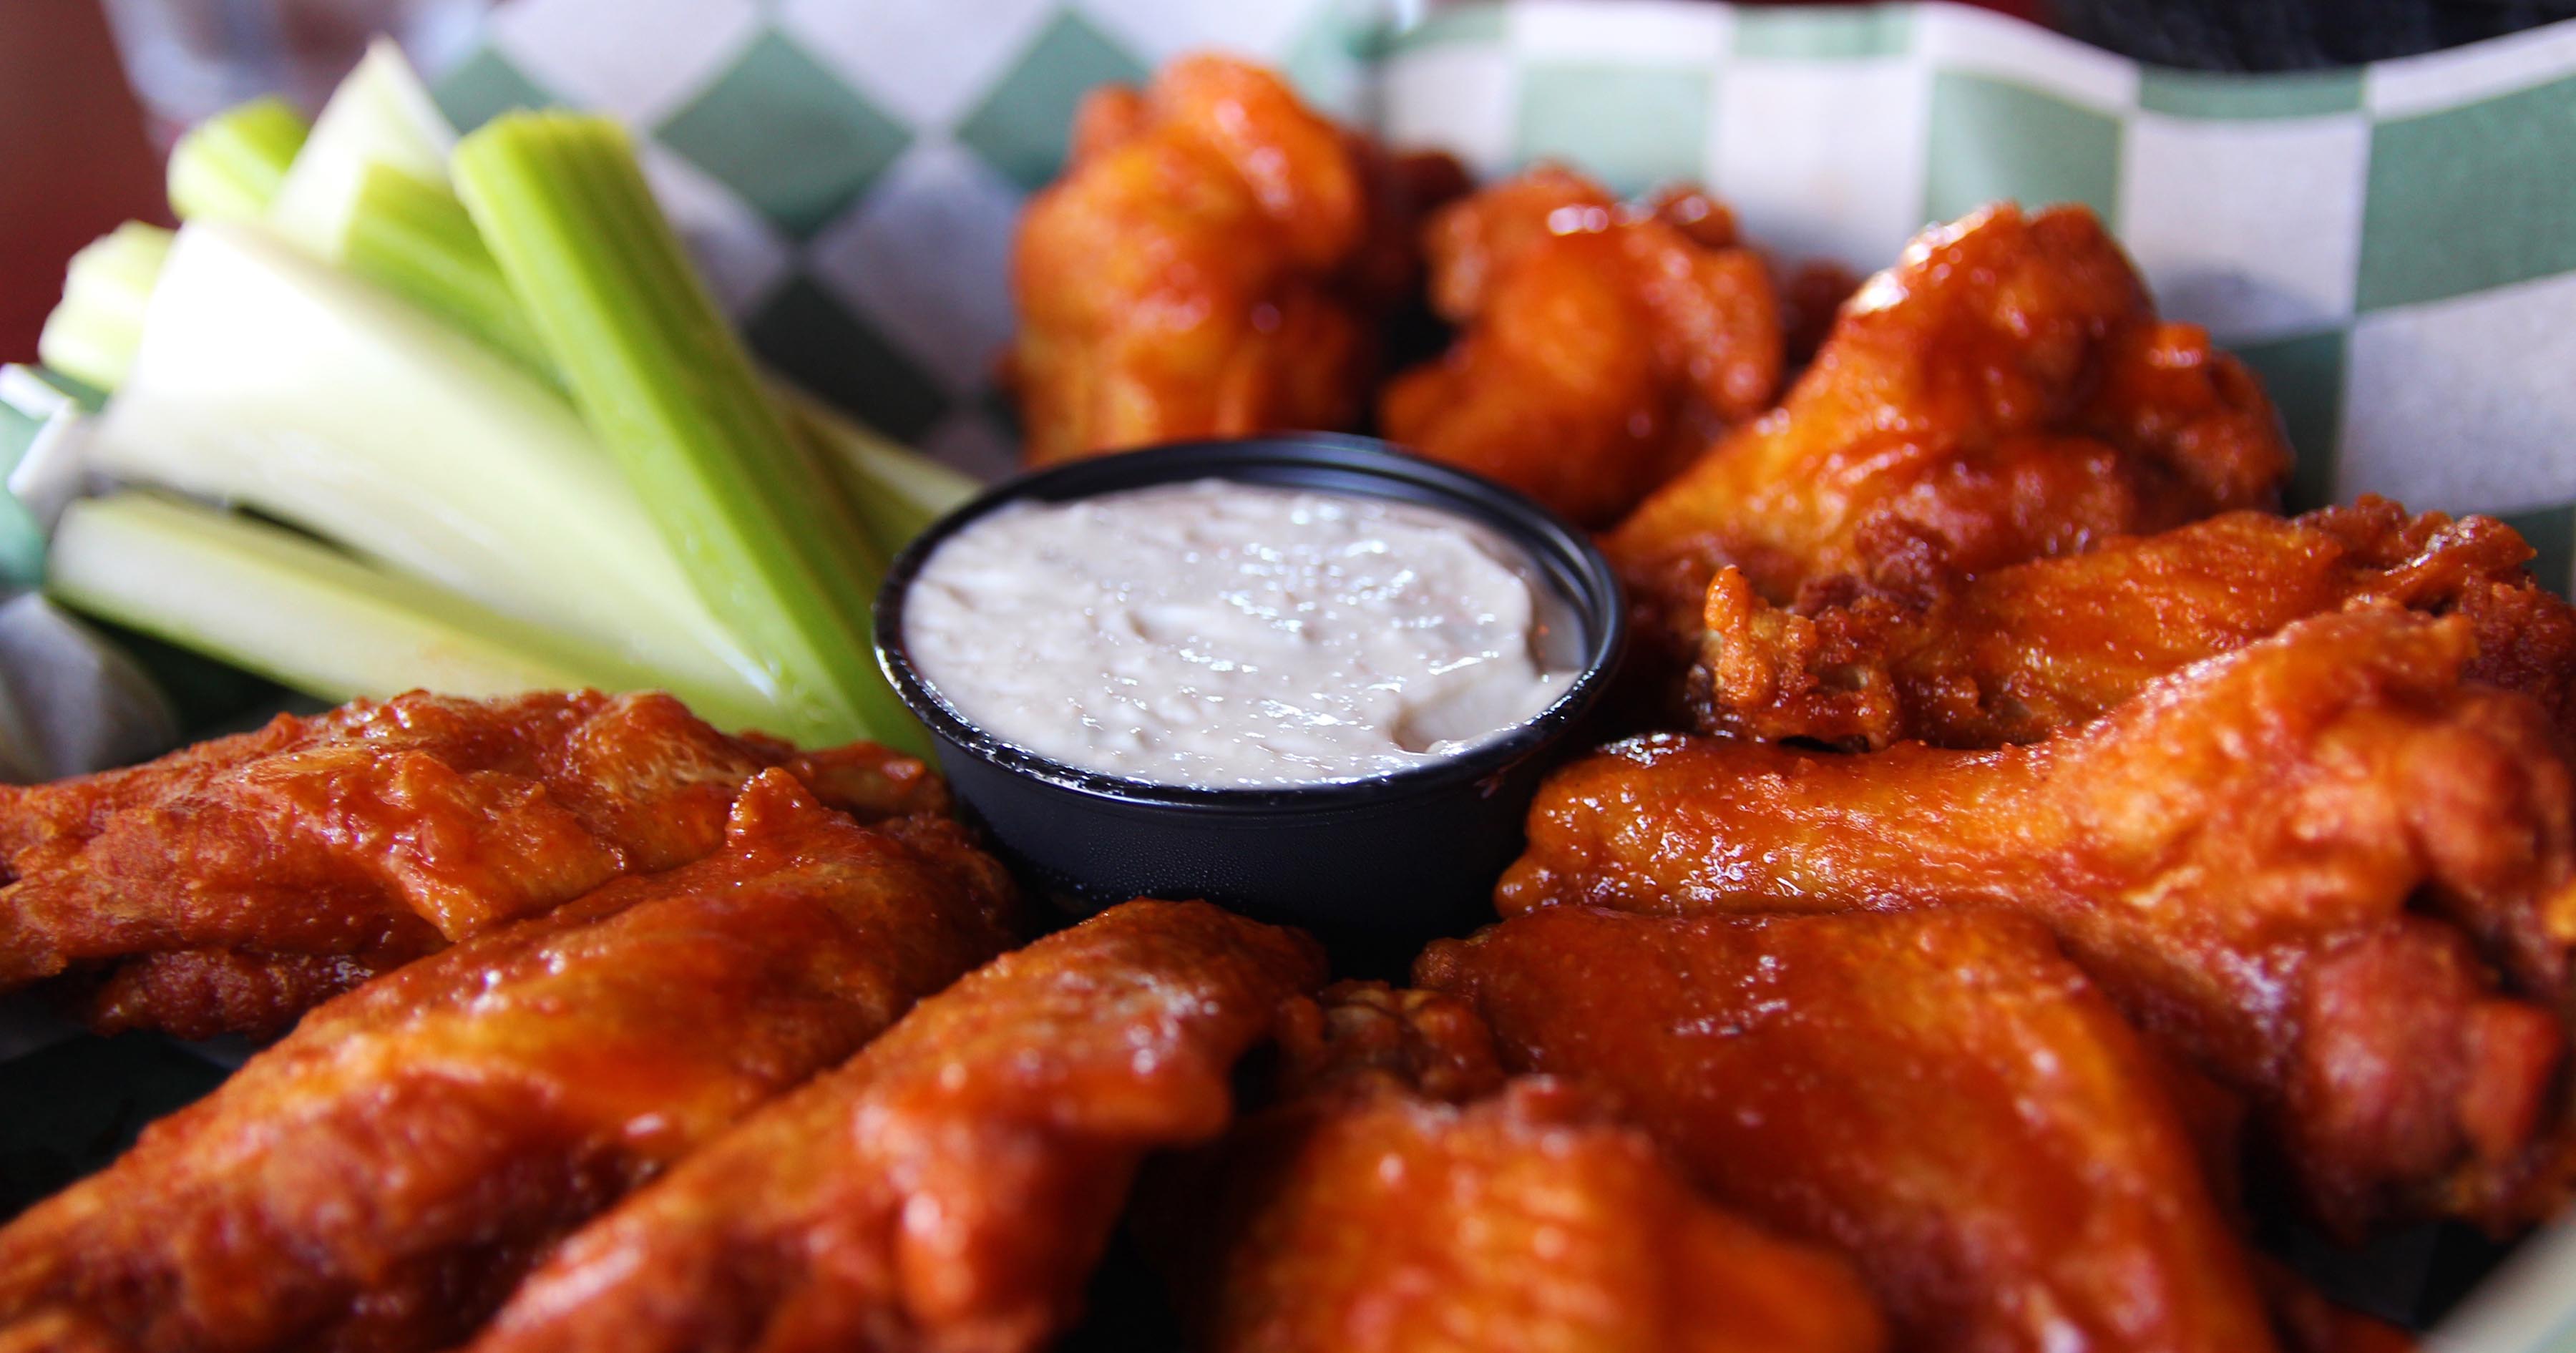 Where to Find Best Buffalo Wings in NY